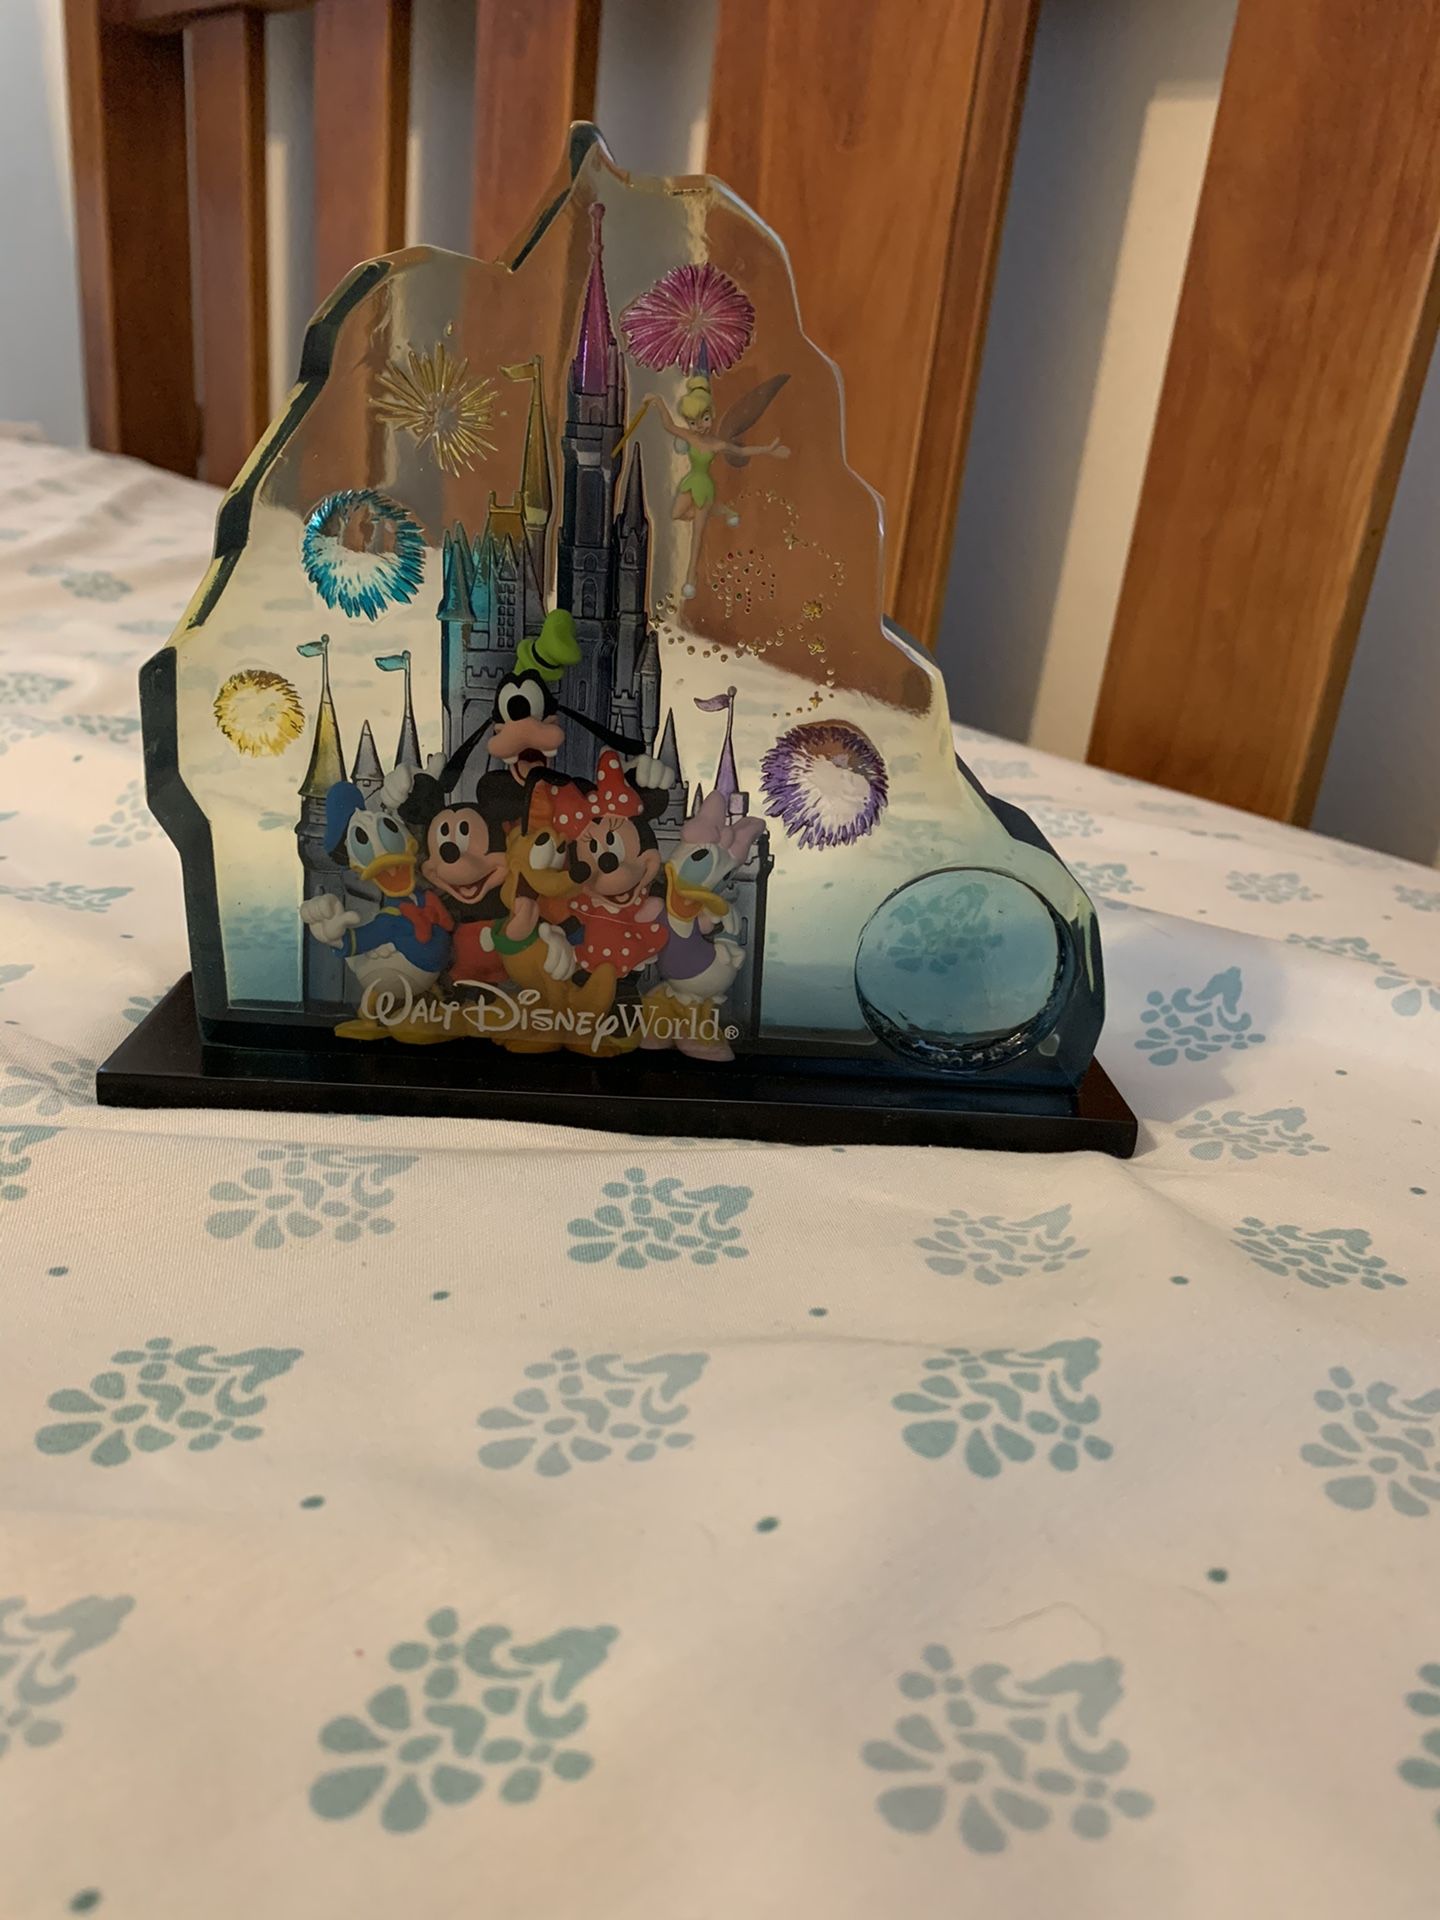 A Collectible Disney Glass Statue for a steal !!